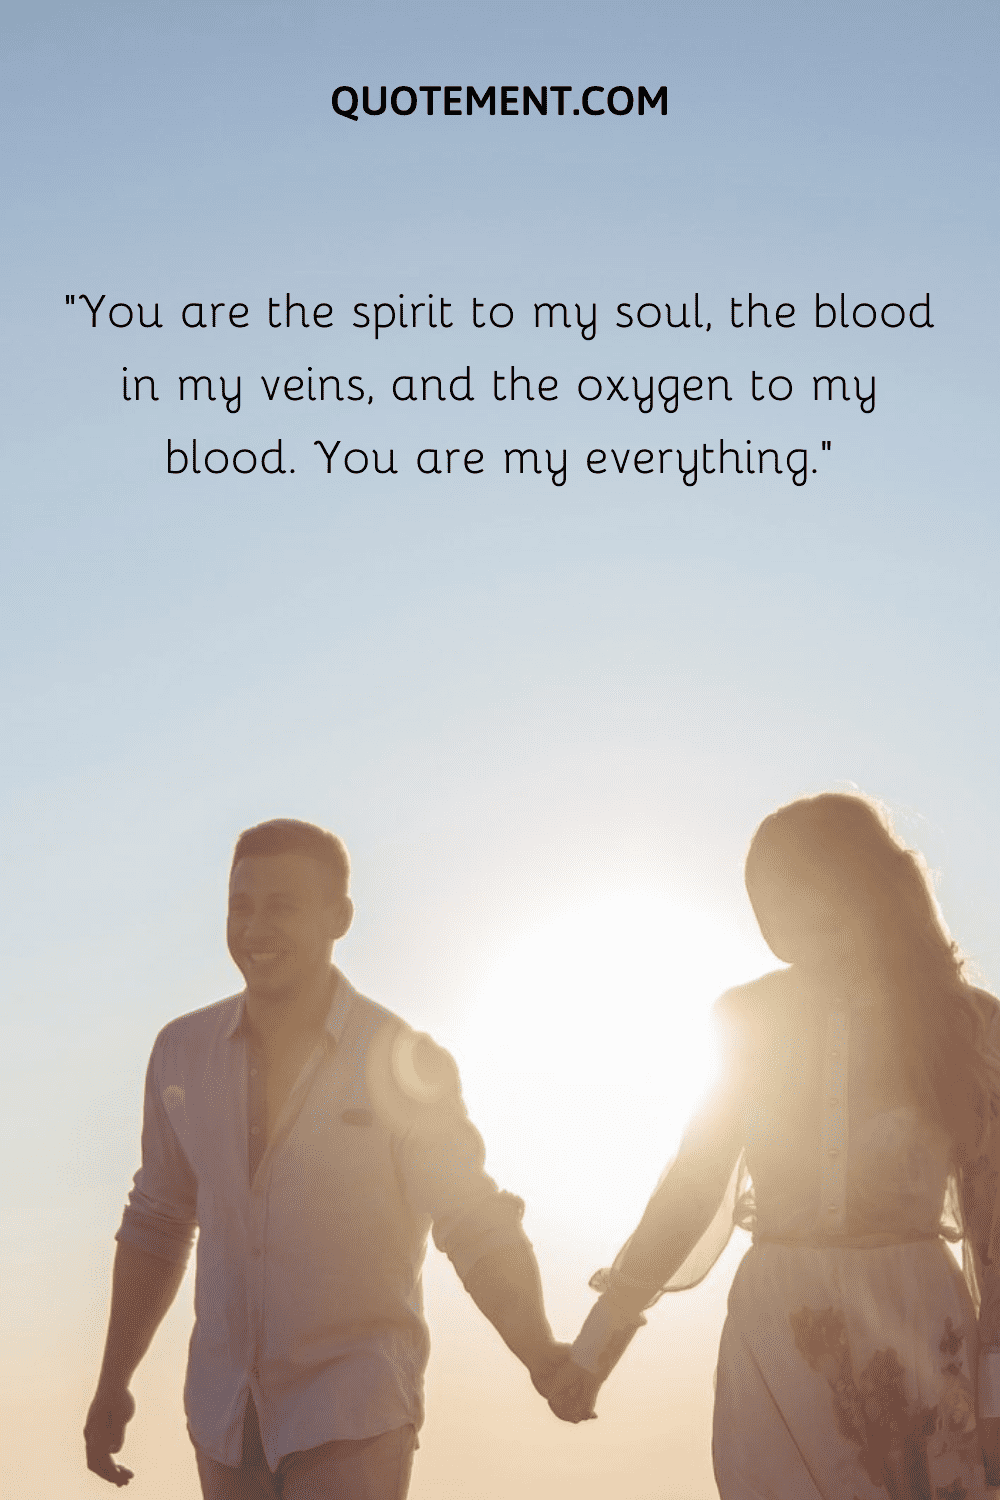 “You are the spirit to my soul, the blood in my veins, and the oxygen to my blood. You are my everything.”